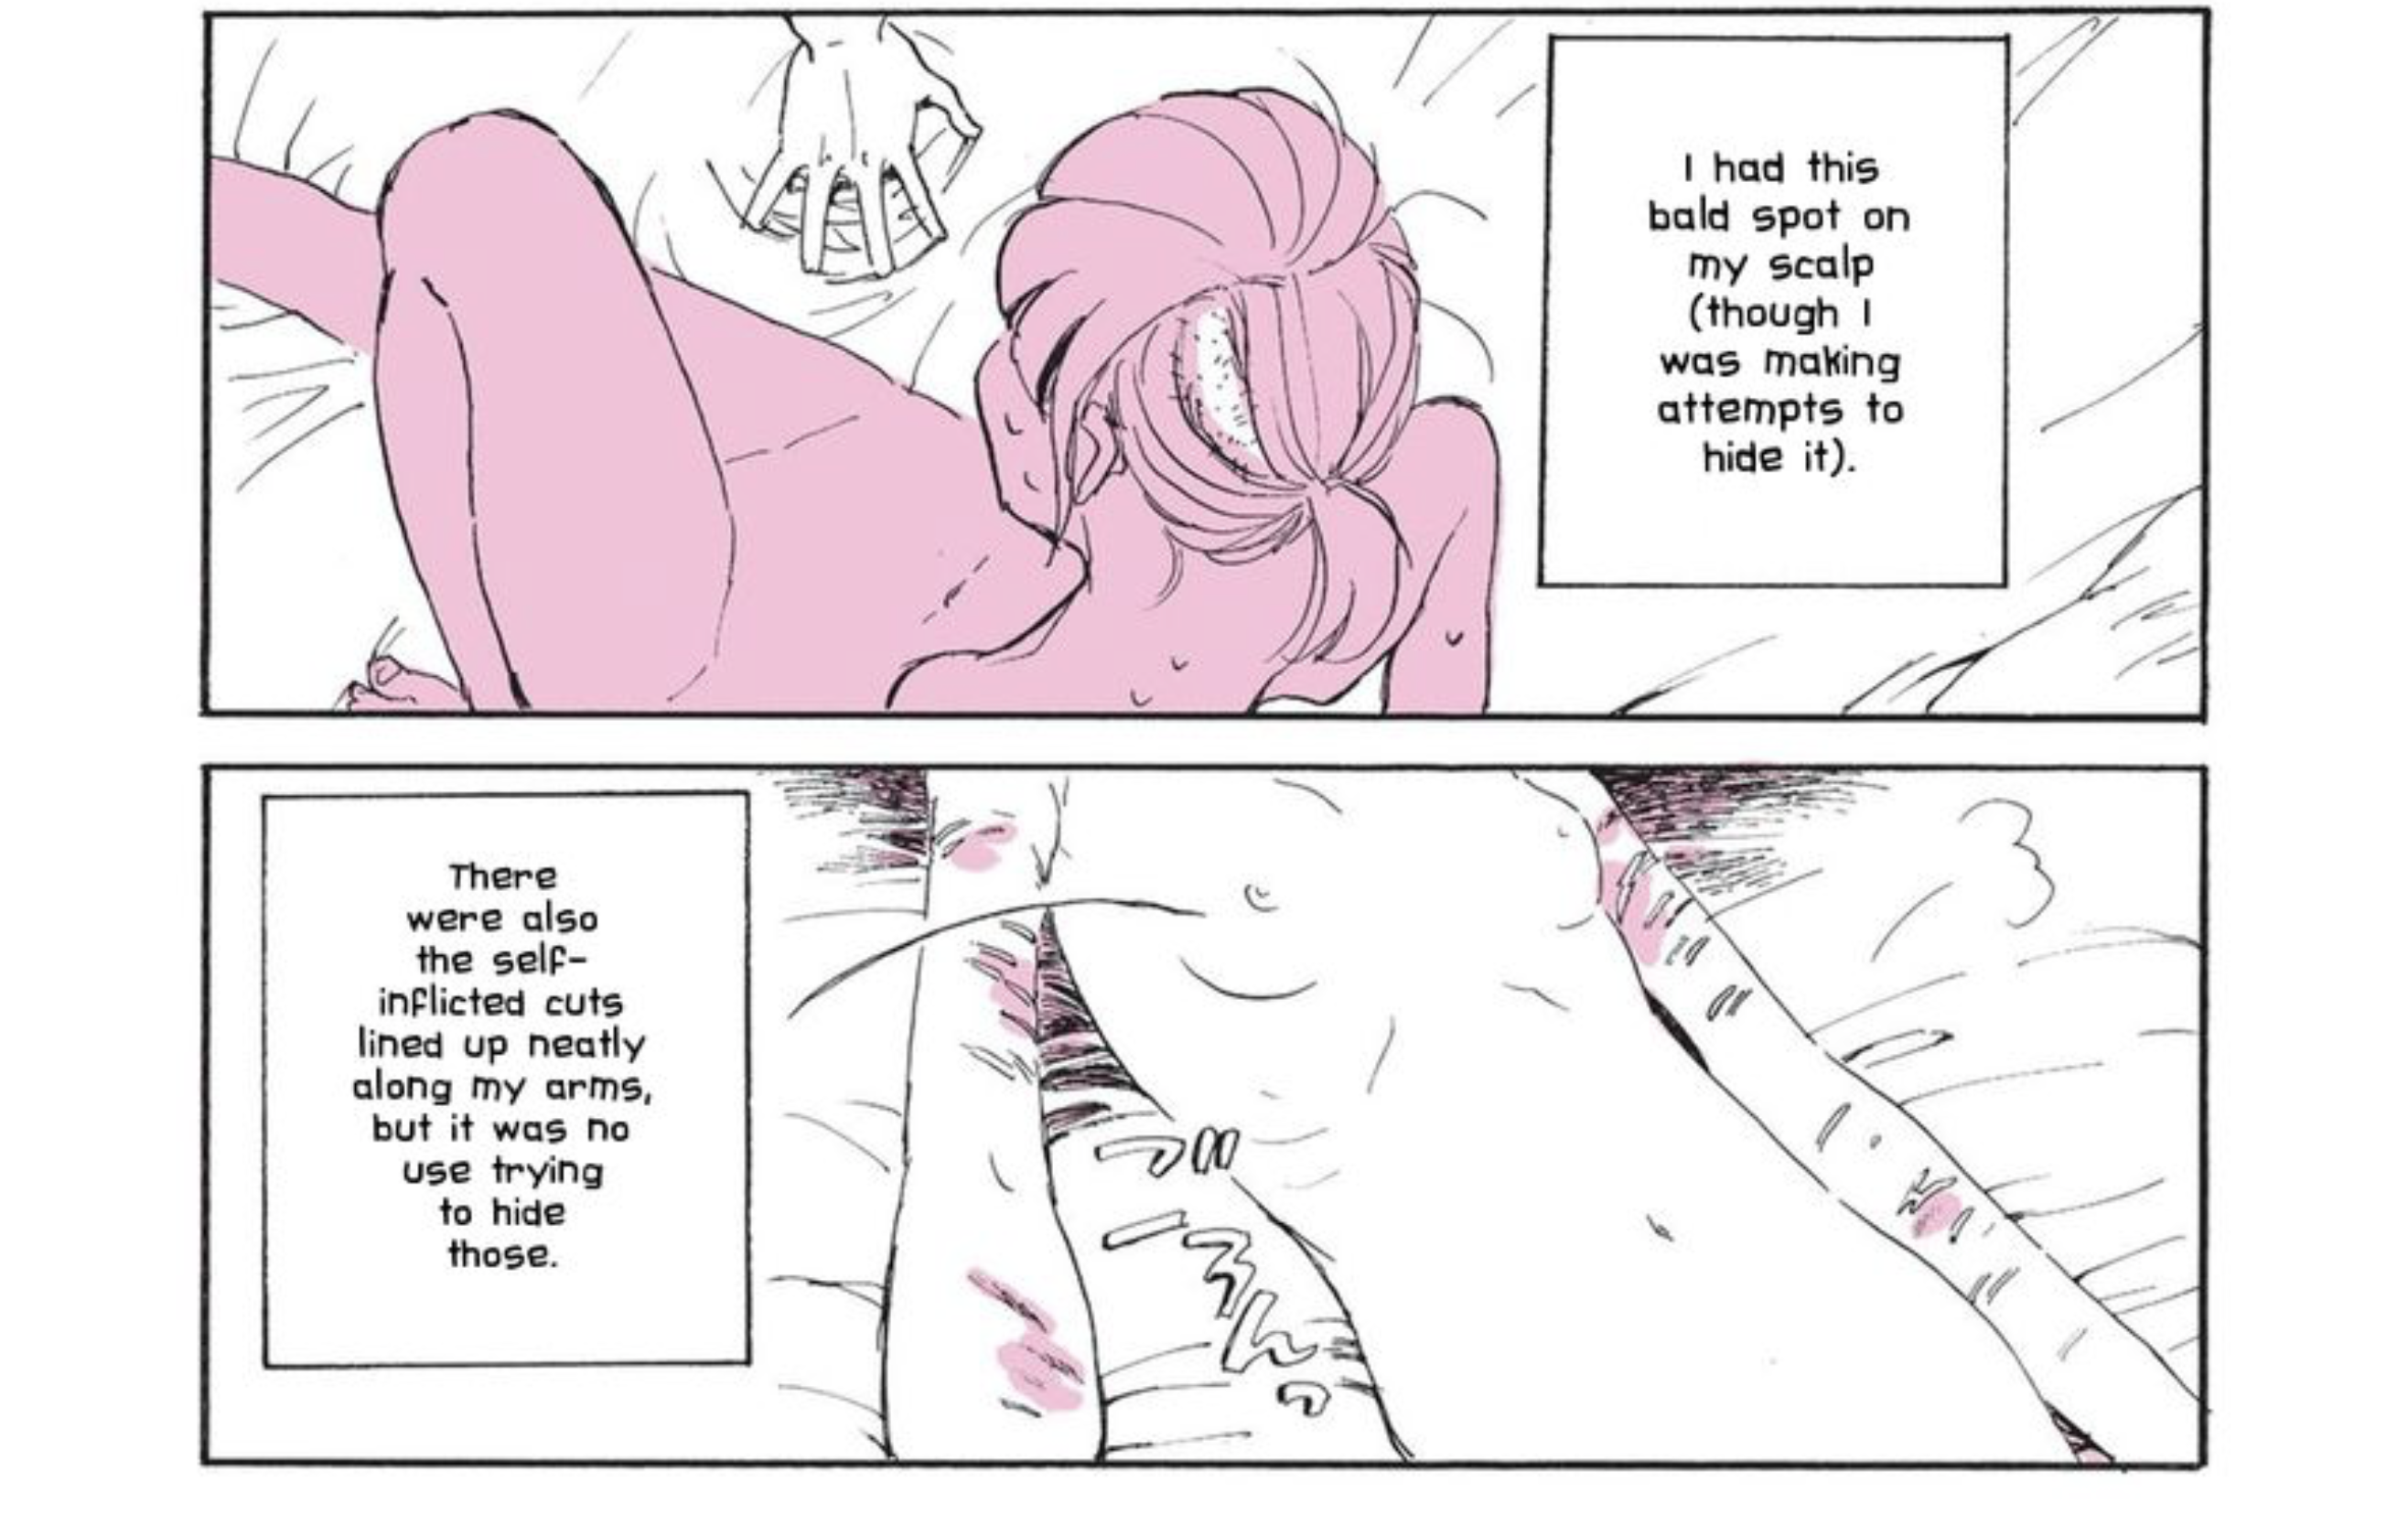 Nagata Kabi depicts self harm and mental health struggles in her manga "My Lesbian Experience With Loneliness" 